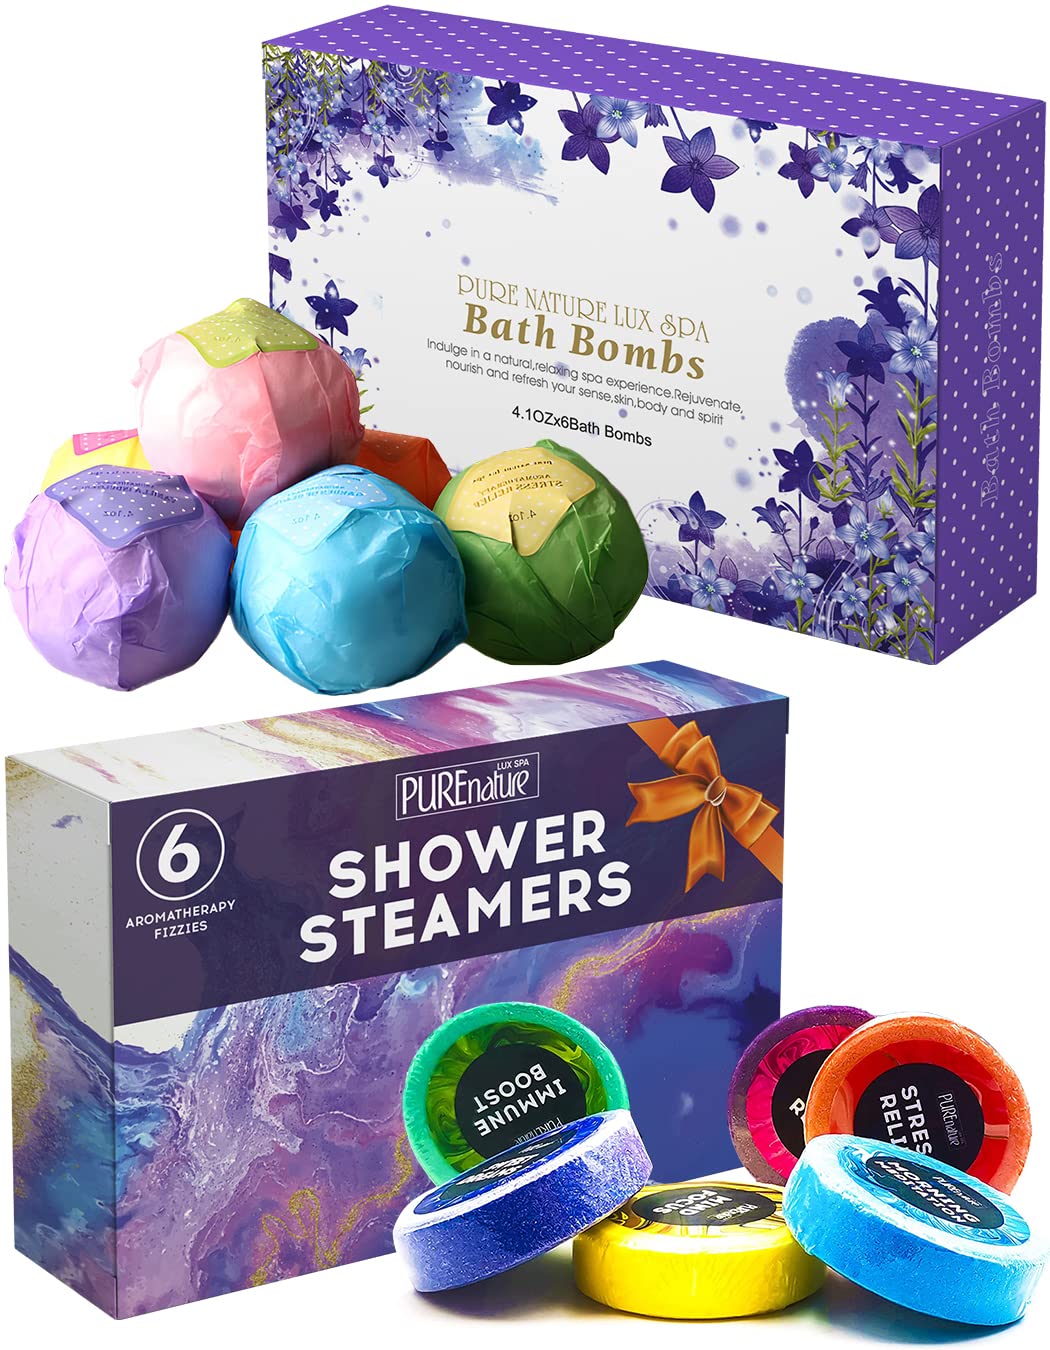 Aromatherapy Shower Steamers and Bath Bombs Gift Set - Stress Relief and Relaxation Spa Gifts for Women and Mom Who Has Everything - Relaxing Tablets with Eucalyptus, Lavender for Relaxation.